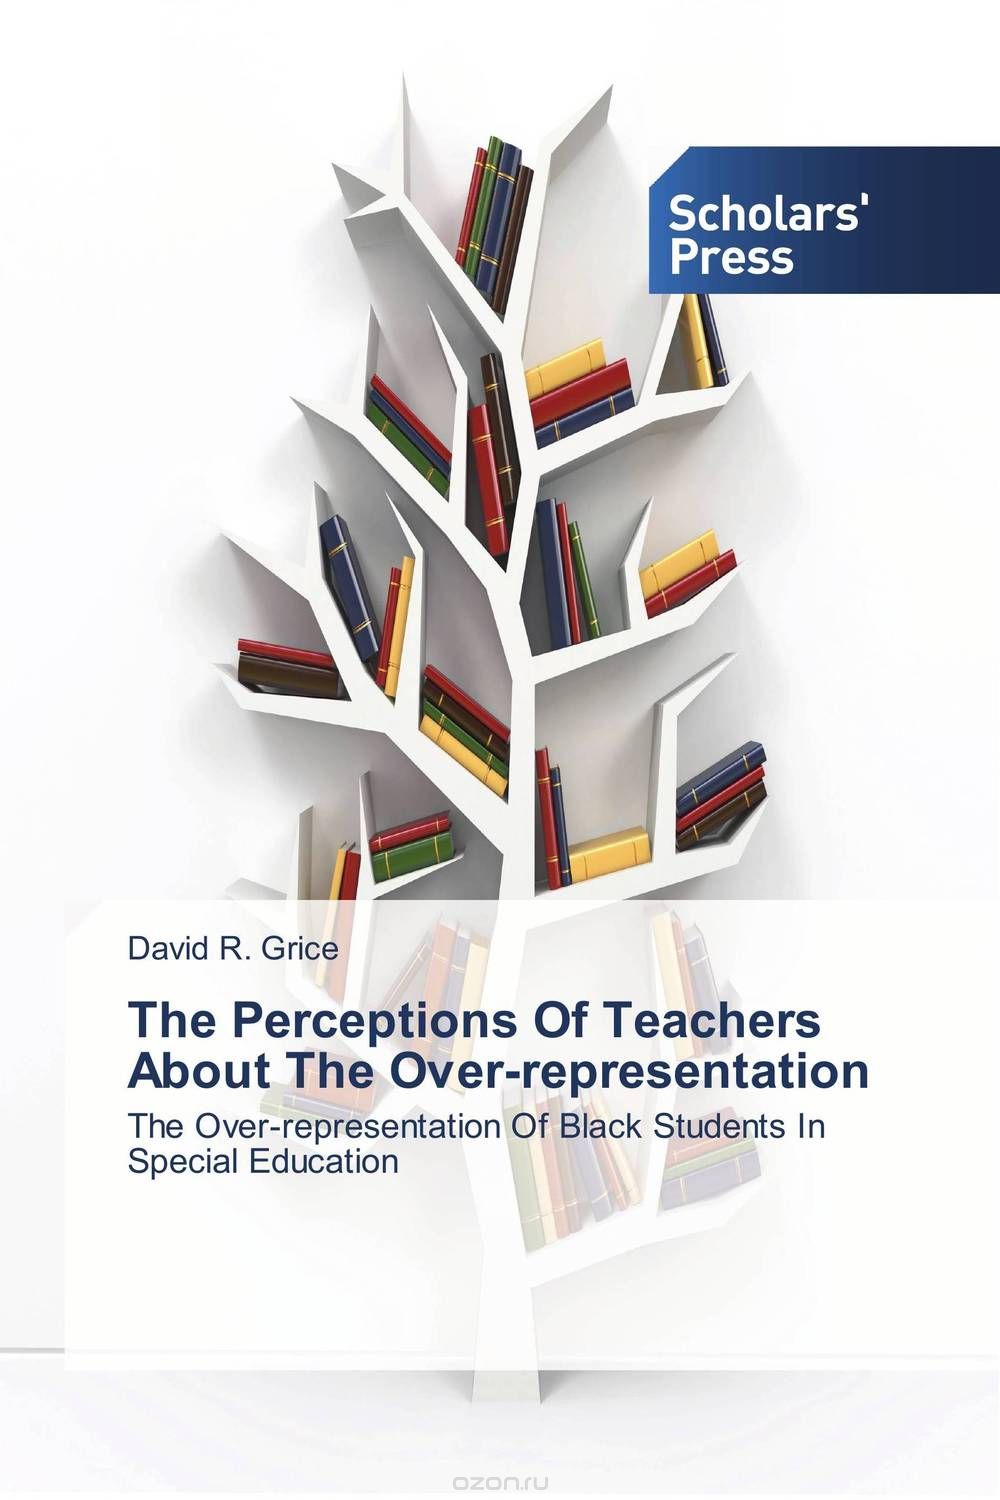 The Perceptions Of Teachers About The Over-representation